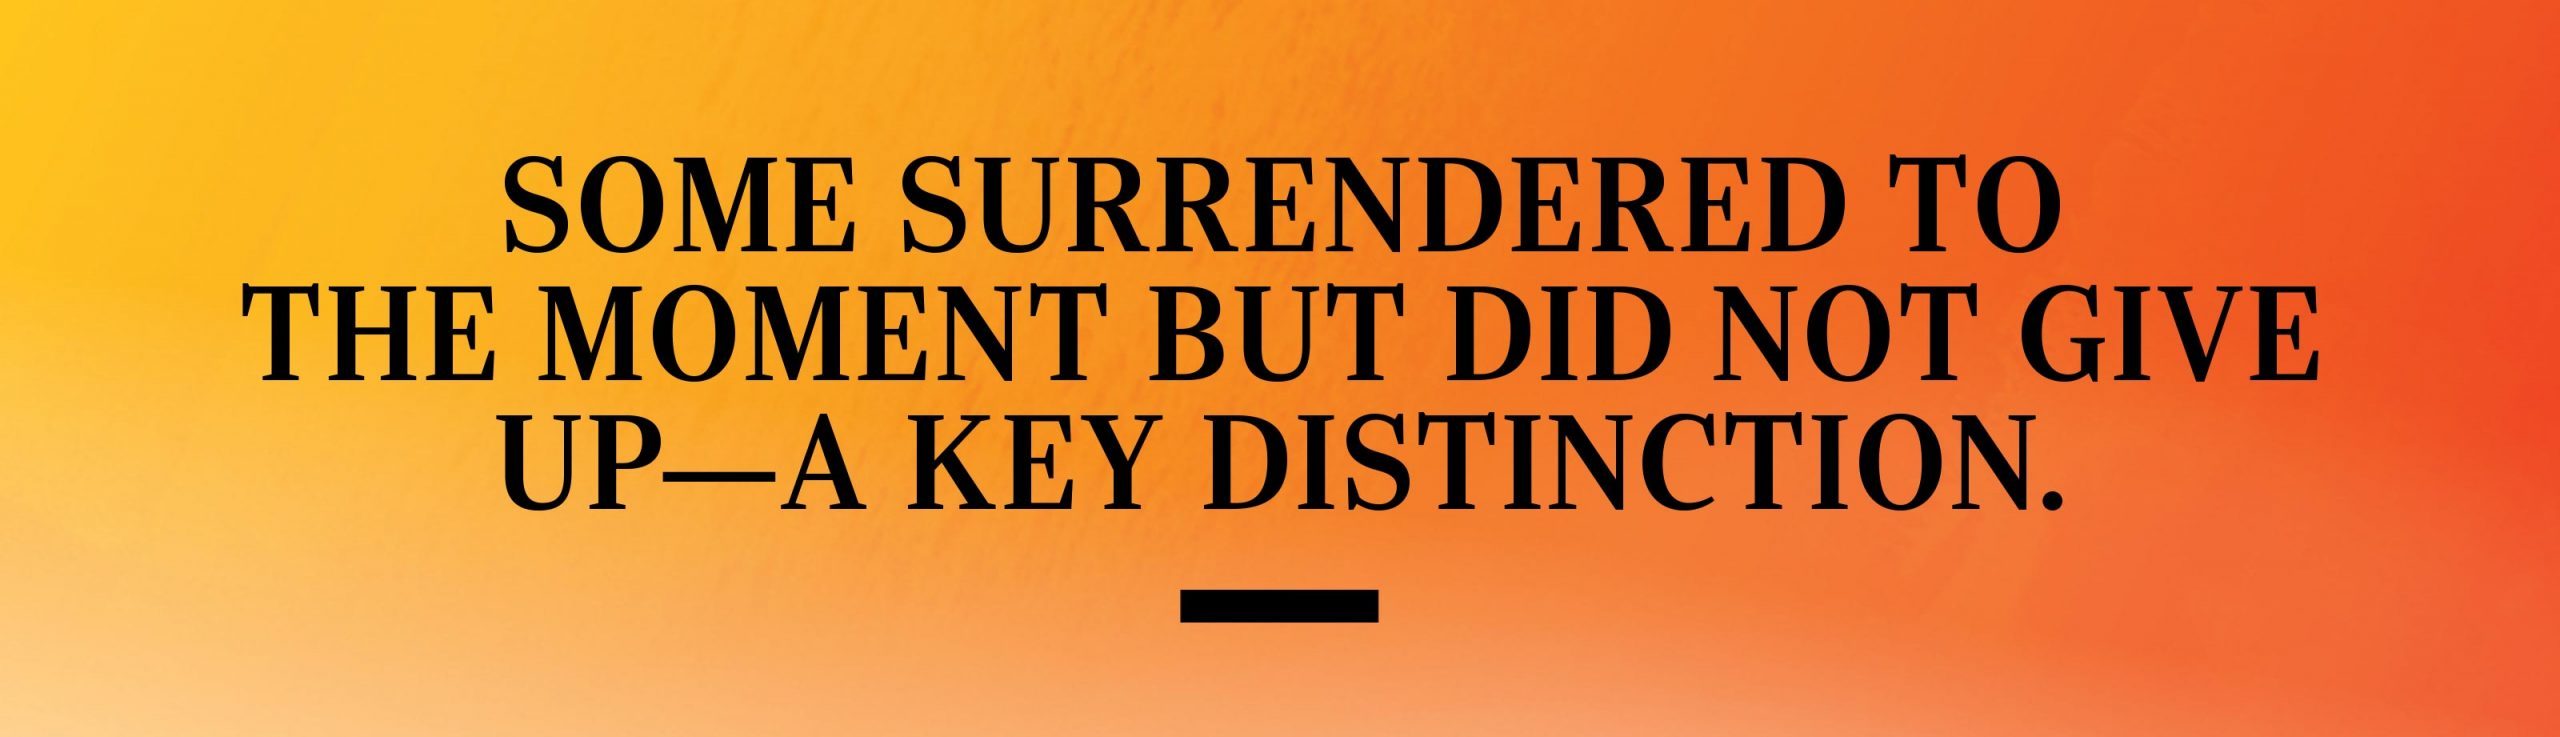 some surrendered to the moment but did not give up—a key distinction.